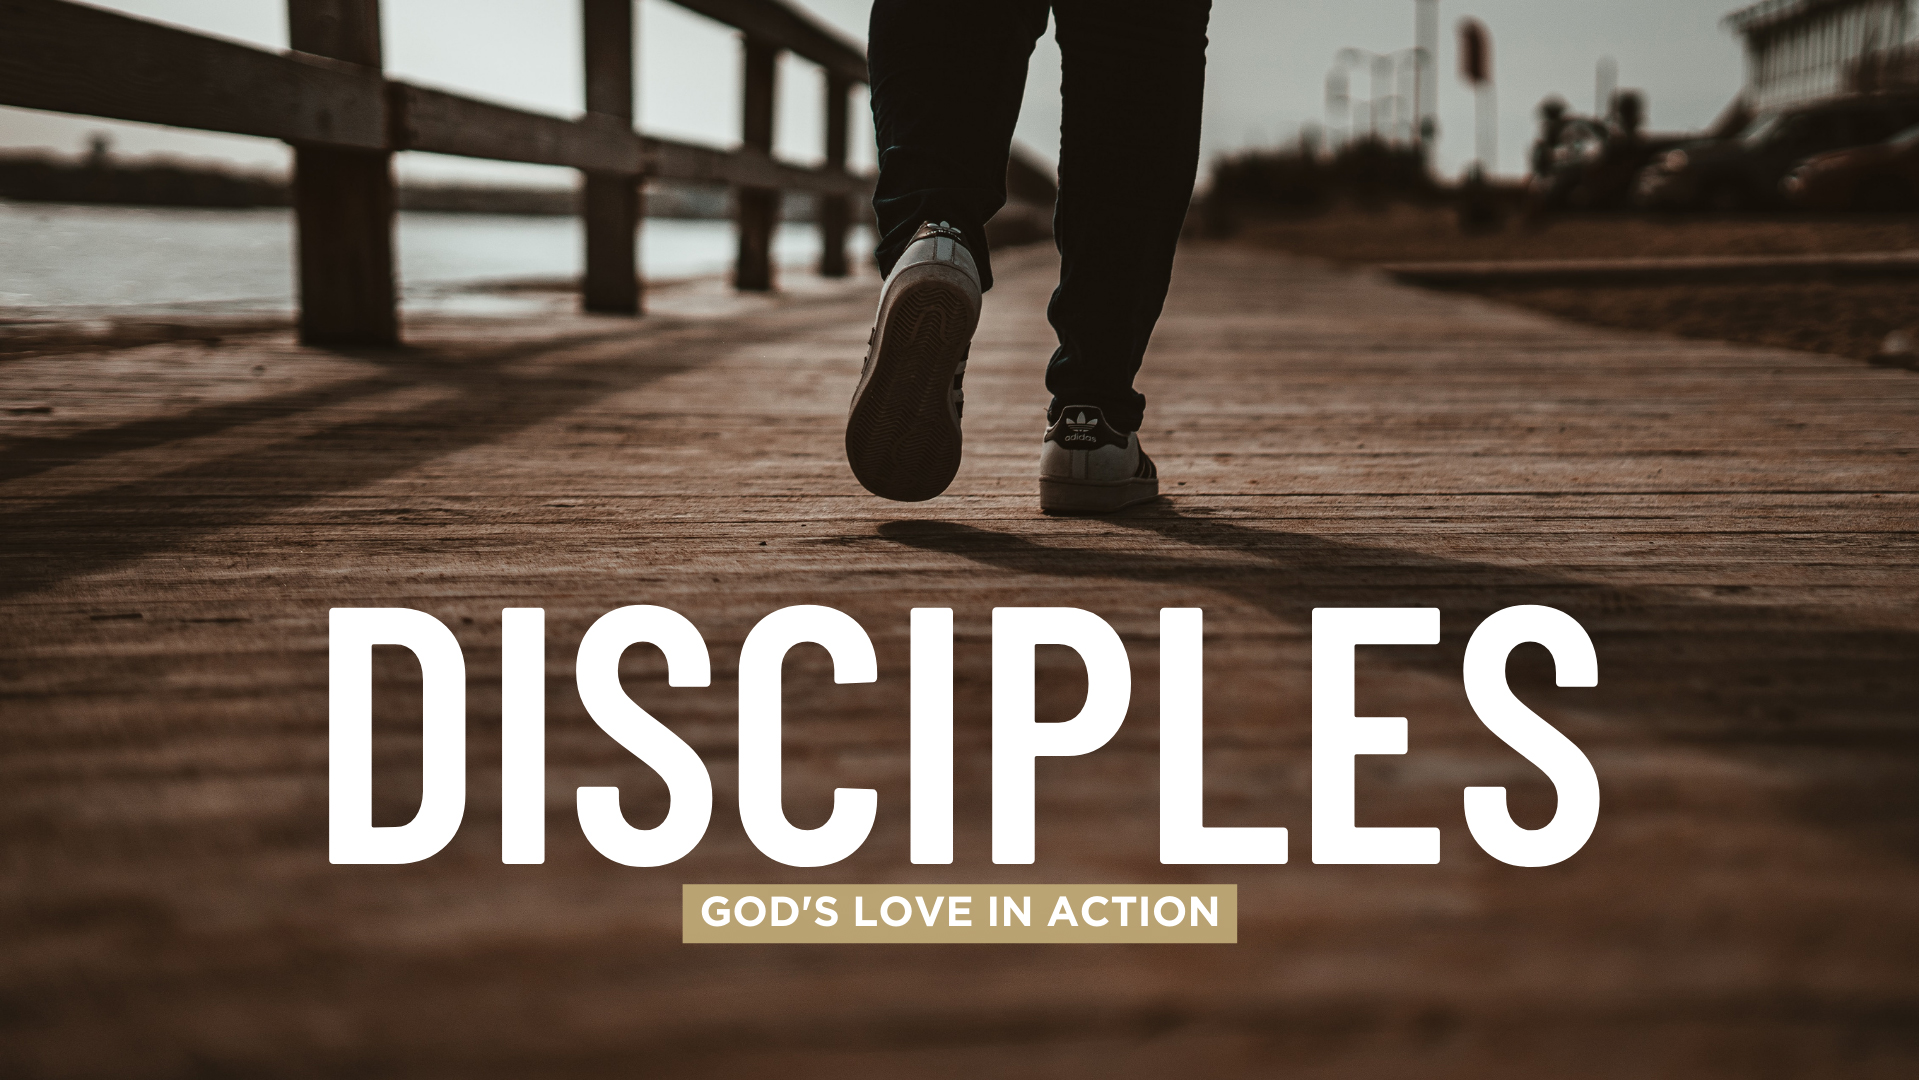 Disciples-Gods-love-in-action